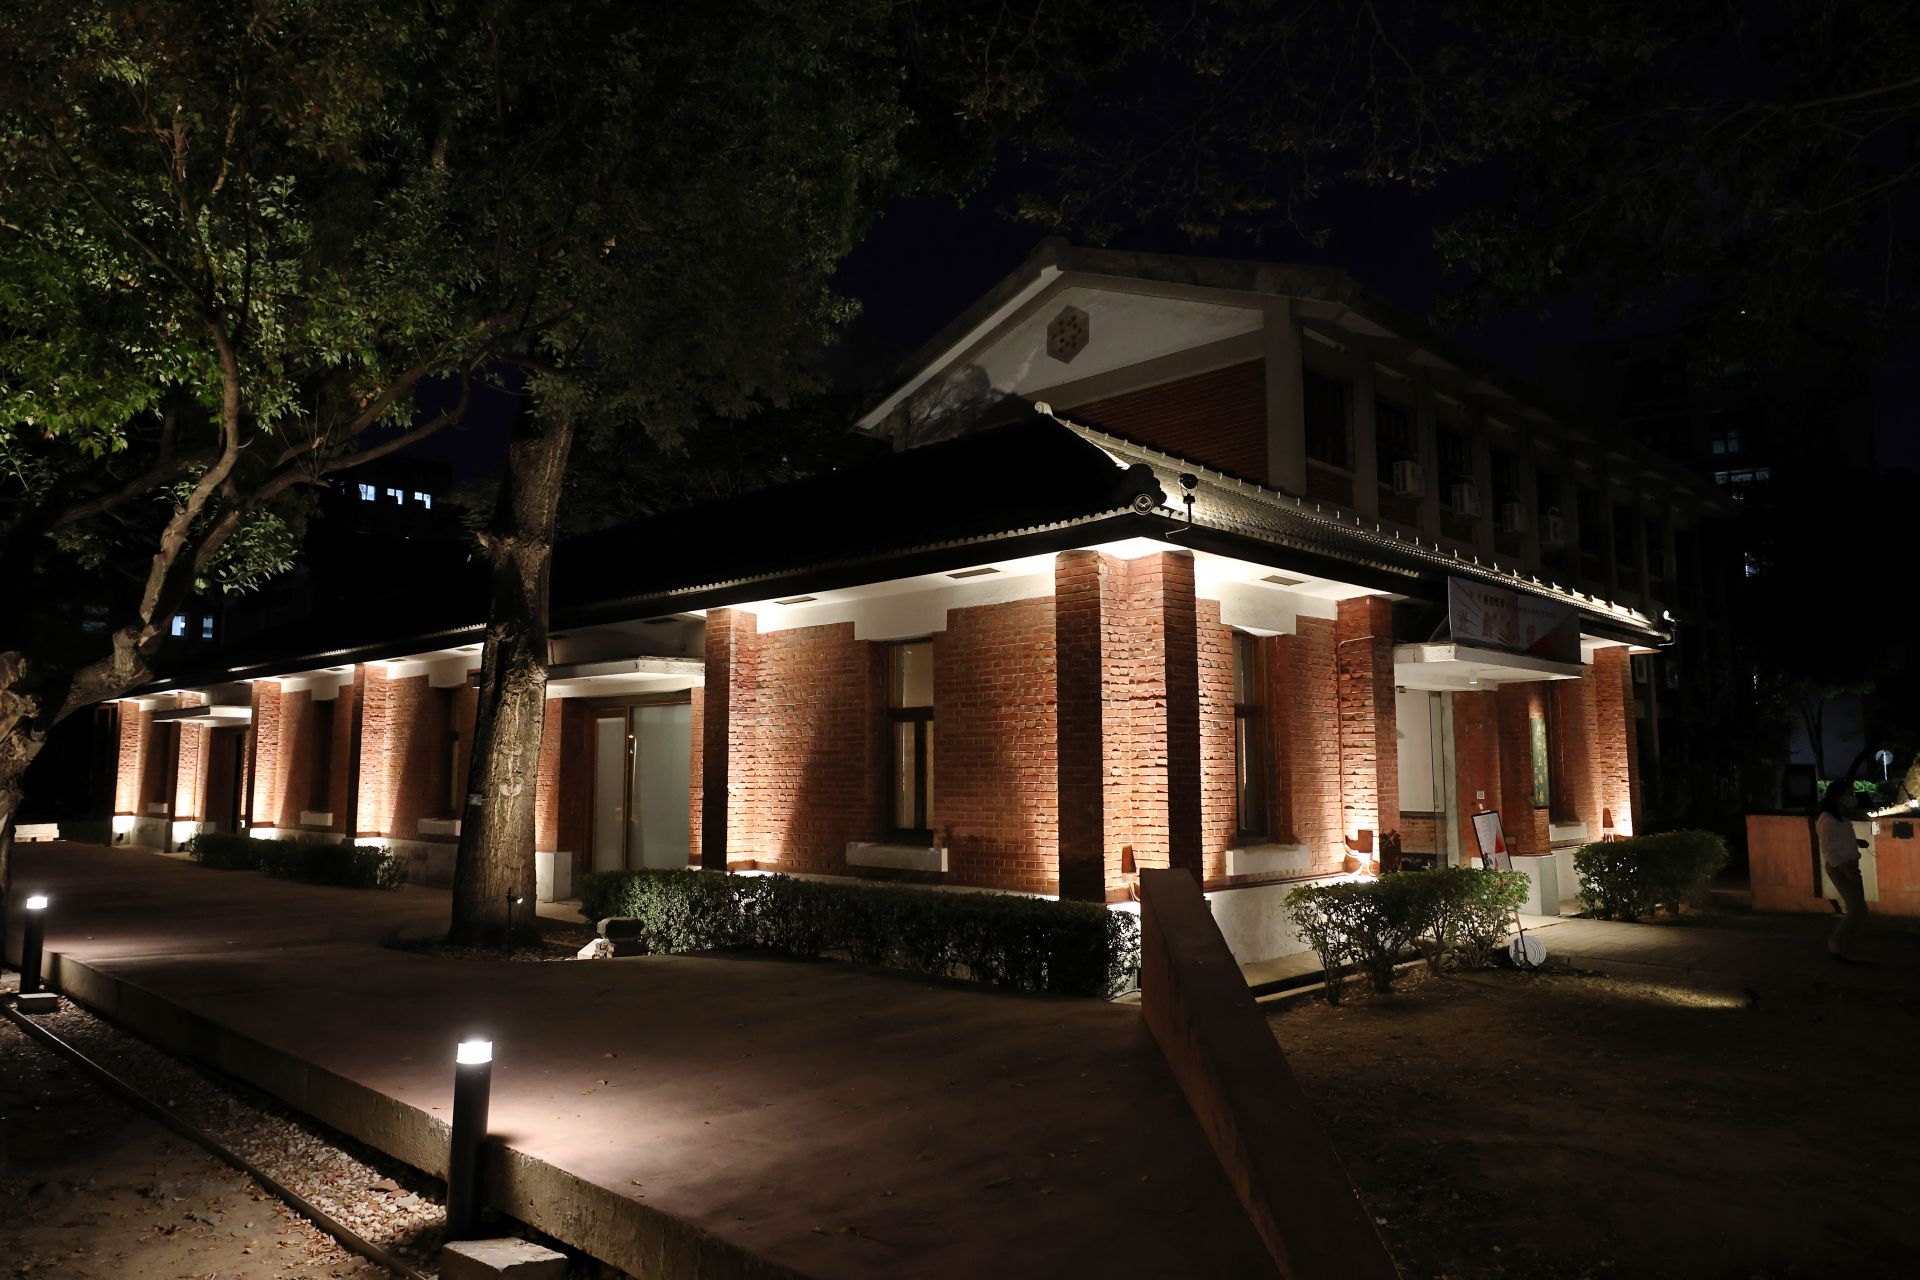 "Dialogue between Light Art and Architecture": NCKU's Historic Museum illuminates memories, conveying happiness and beauty.